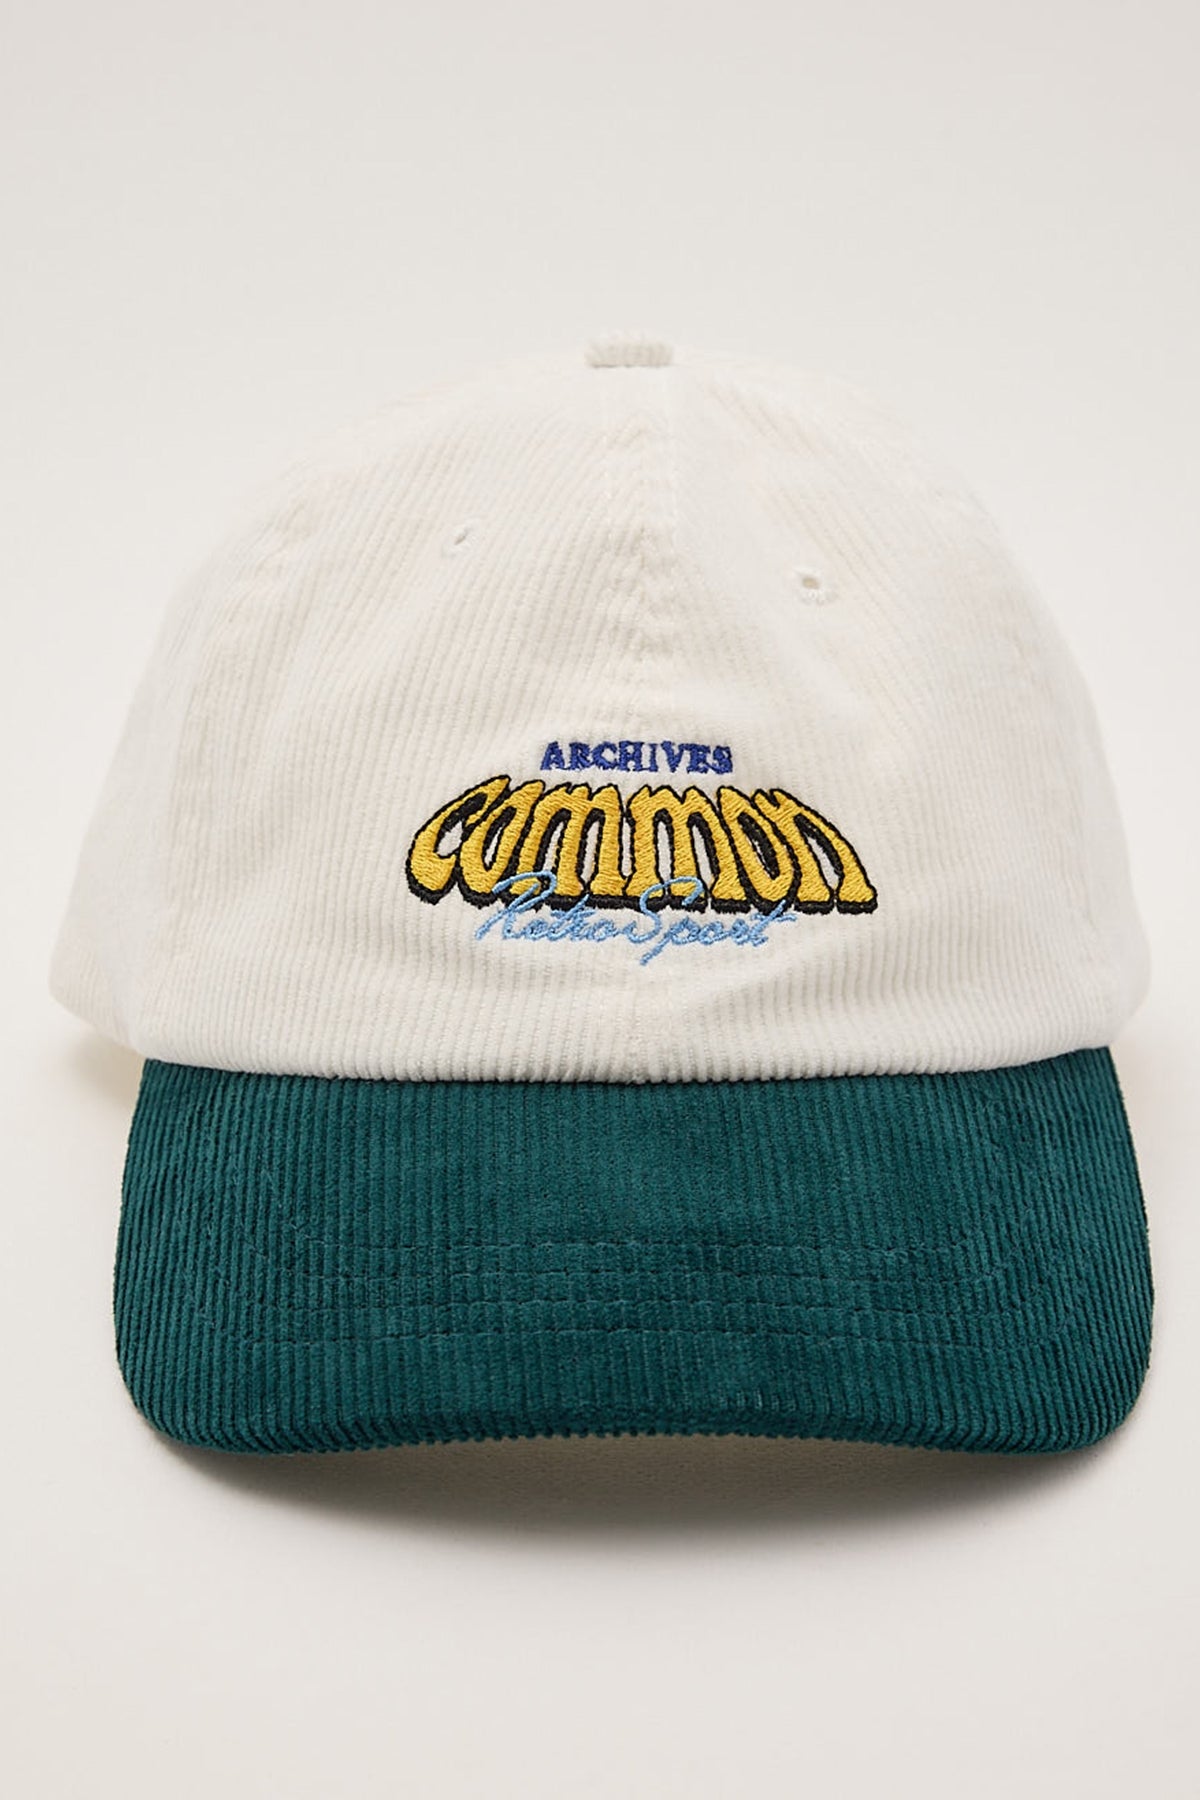 Common Need Archives Cord Skate Cap Cream/Teal